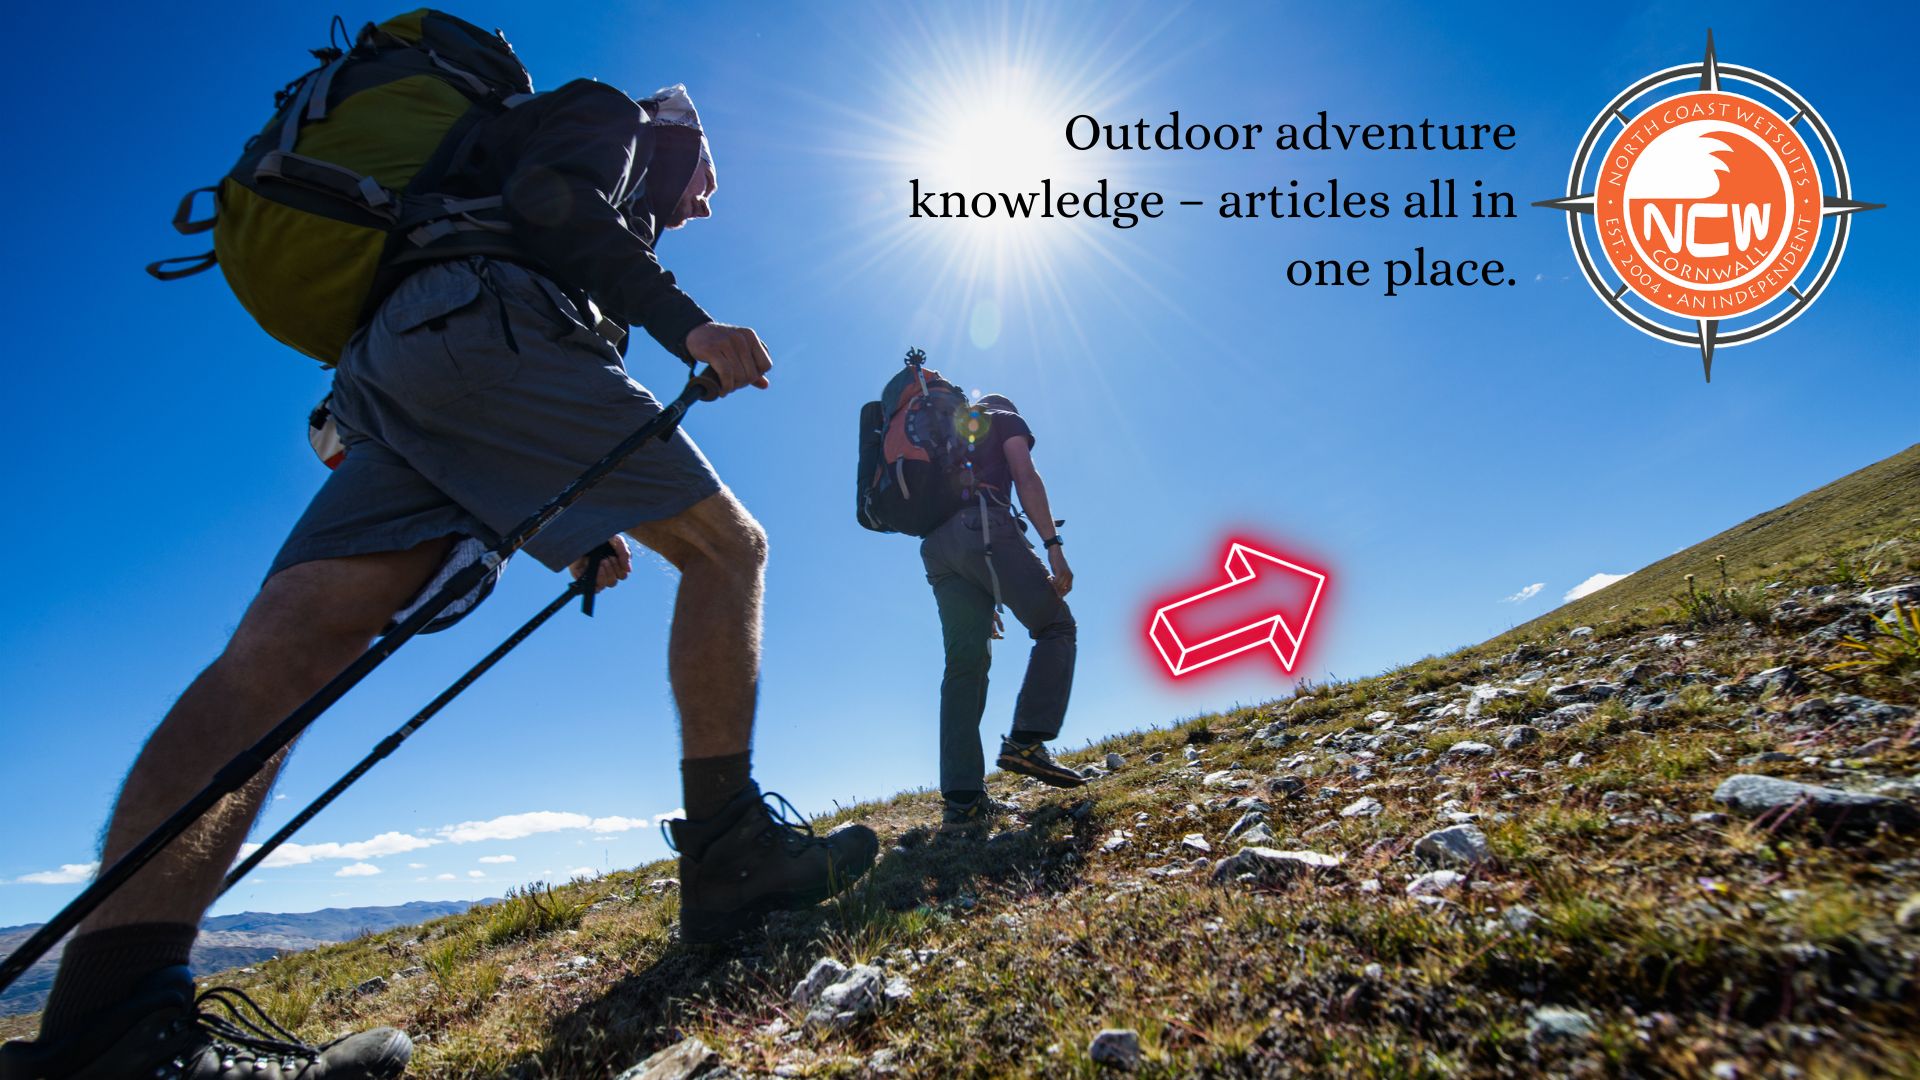 Outdoor adventure knowledge – articles all in one place.